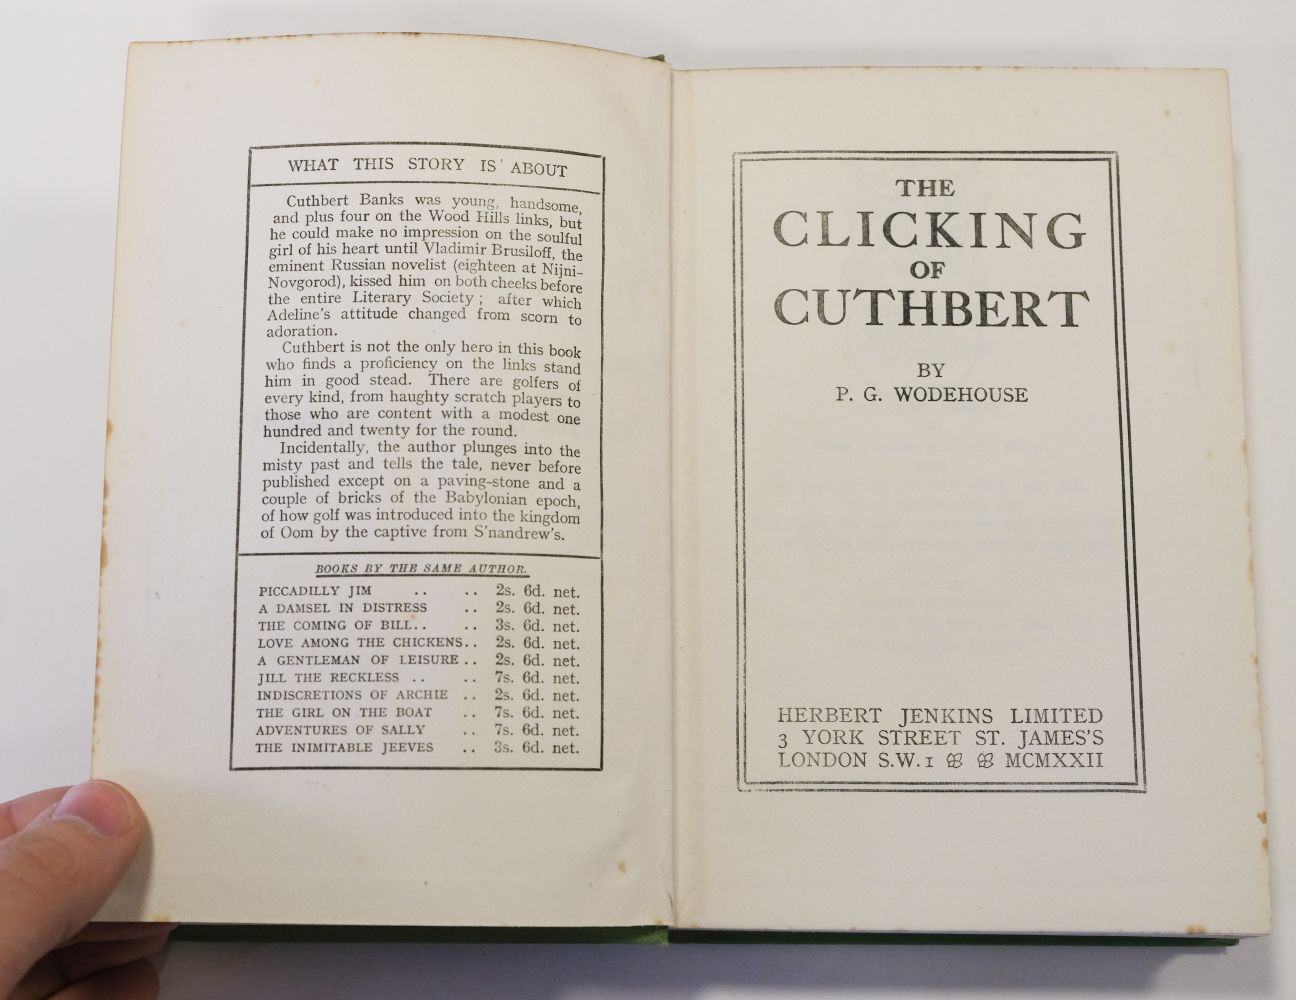 Wodehouse (P.G.). The Clicking of Cuthbert, 1st edition, 1922 - Image 8 of 12